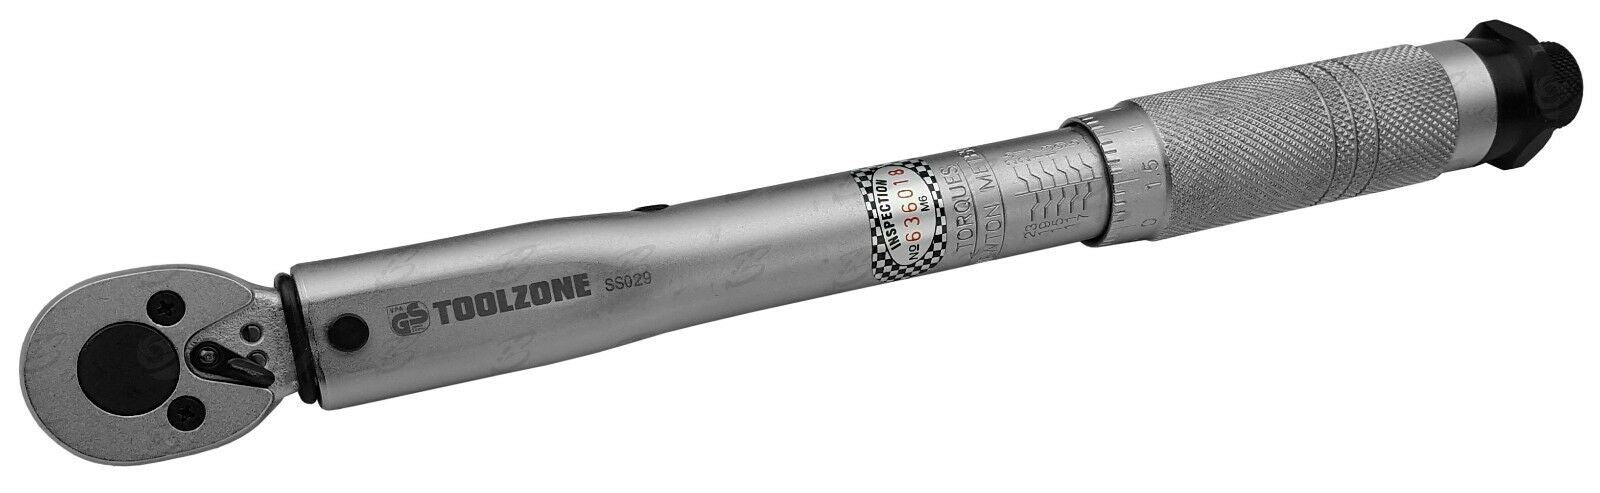 TOOLZONE 1/4" DRIVE CALIBRATED TORQUE WRENCH 5Nm - 25Nm